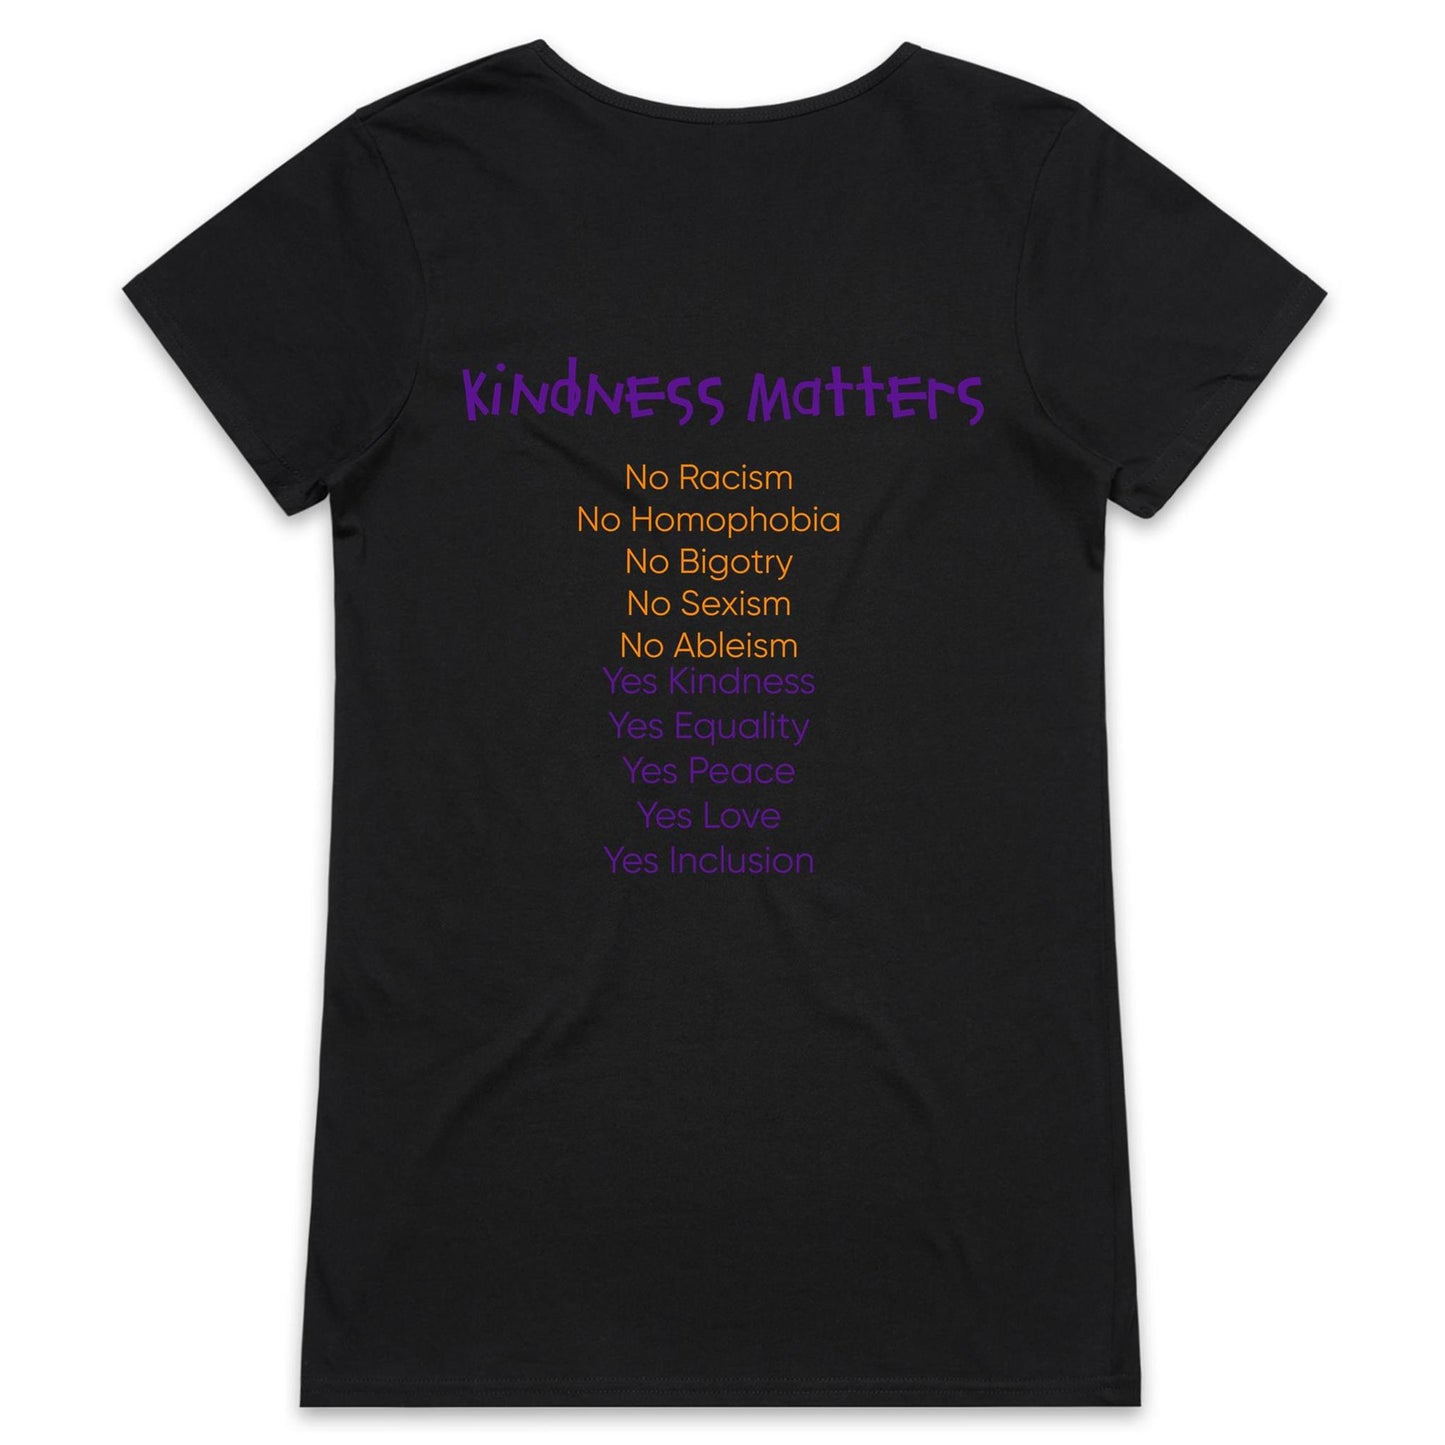 Kindness Matters Womens V-Neck T-Shirt with Nima and Dawa print by D.B. - printed front and back